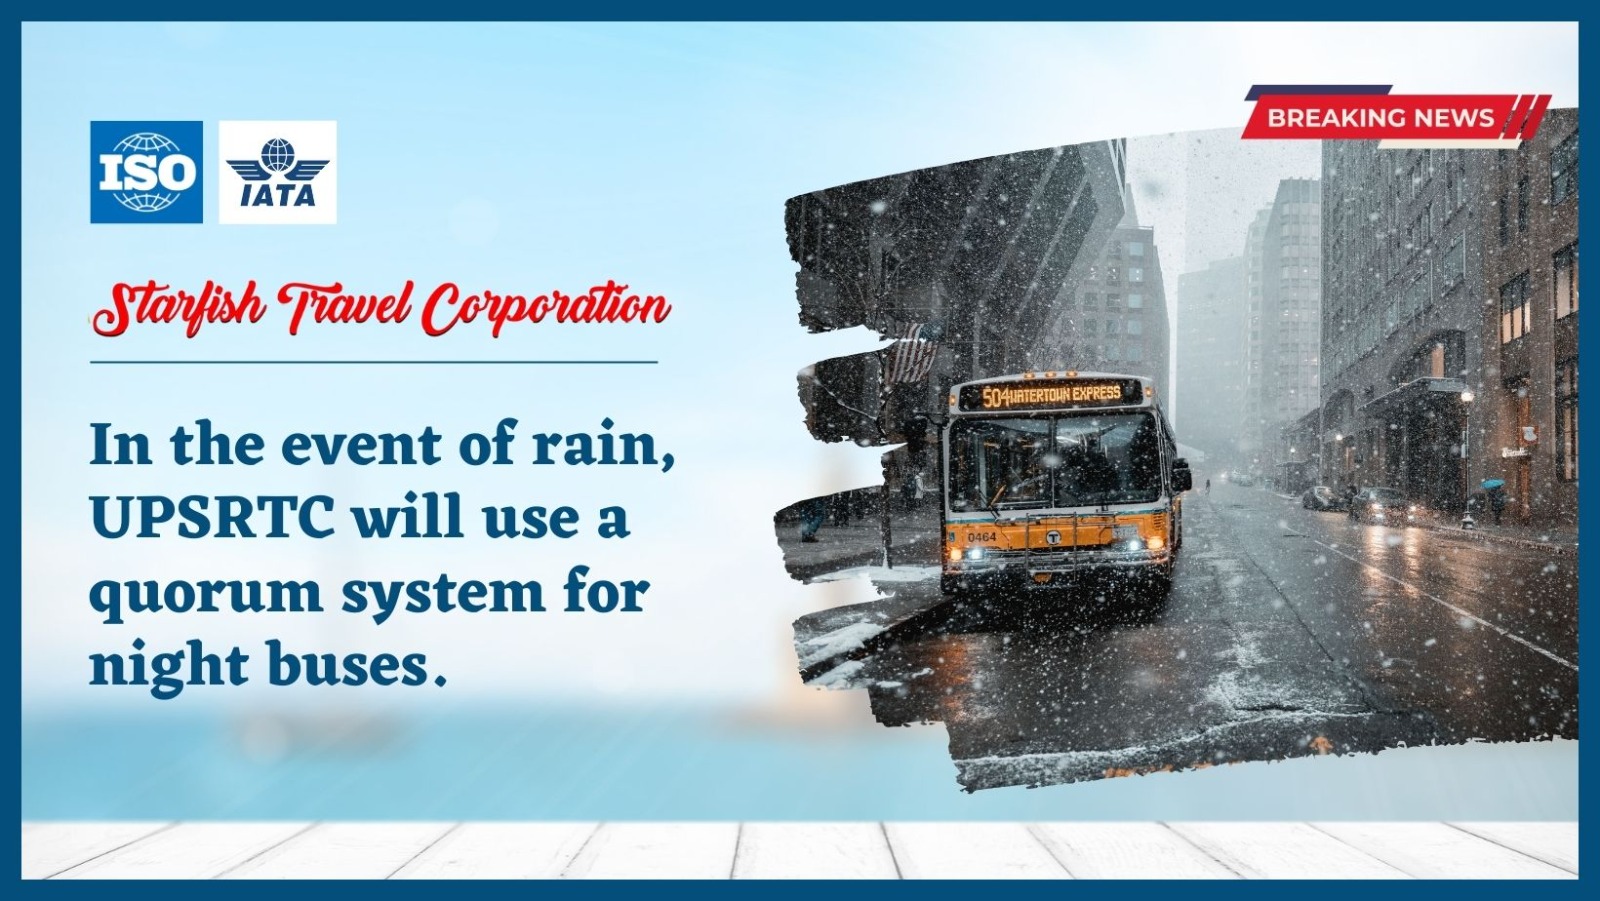 In the event of rain, UPSRTC will use a quorum system for night buses.